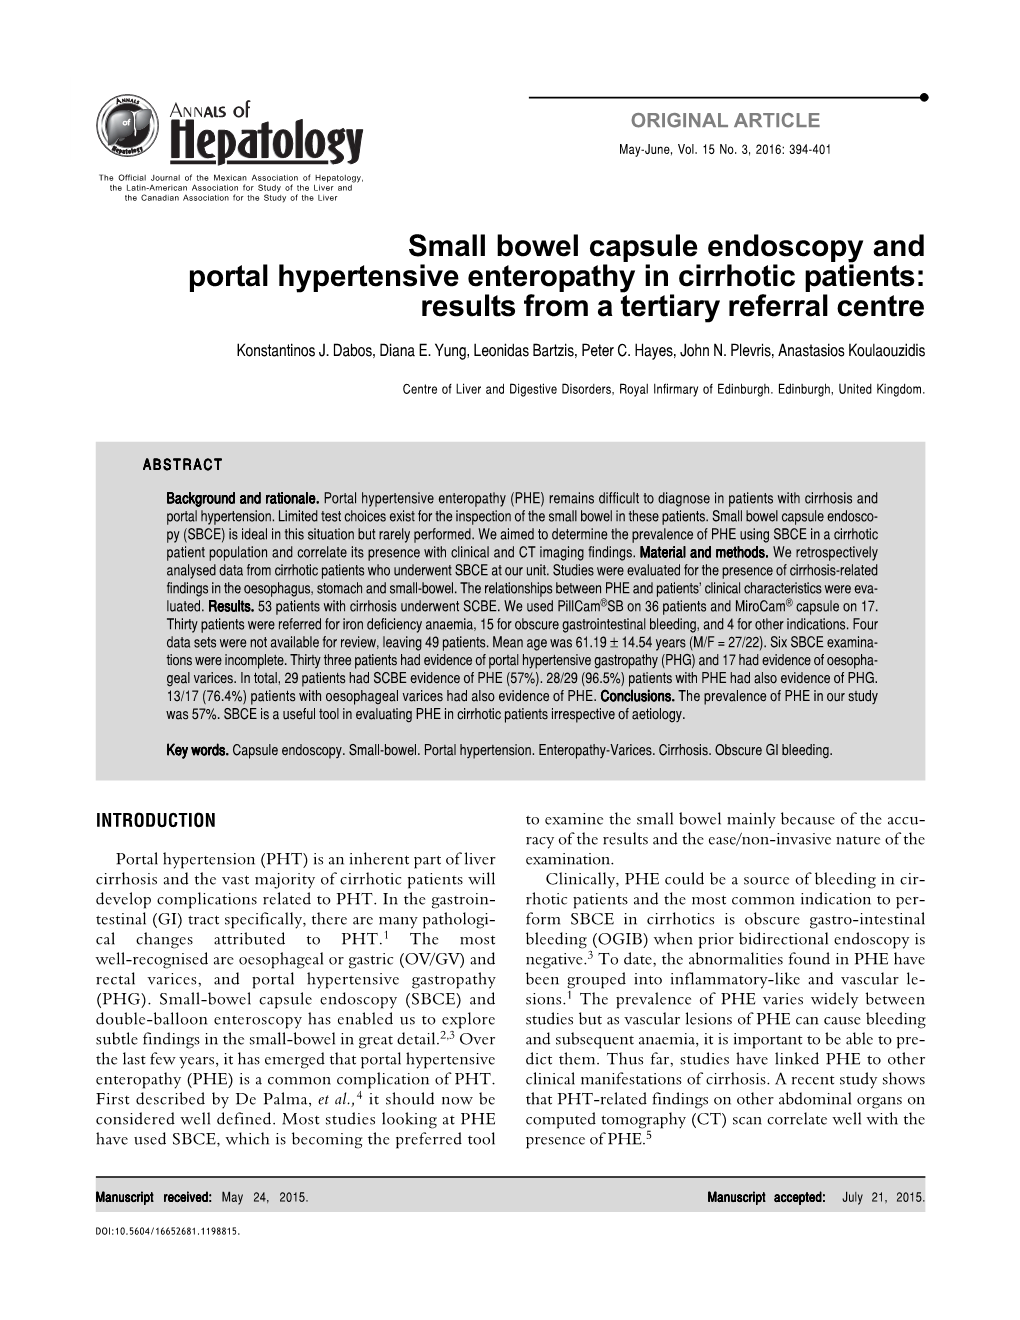 Small Bowel Capsule Endoscopy and Portal Hypertensive Enteropathy in Cirrhotic Patients: Results from a Tertiary Referral Centre